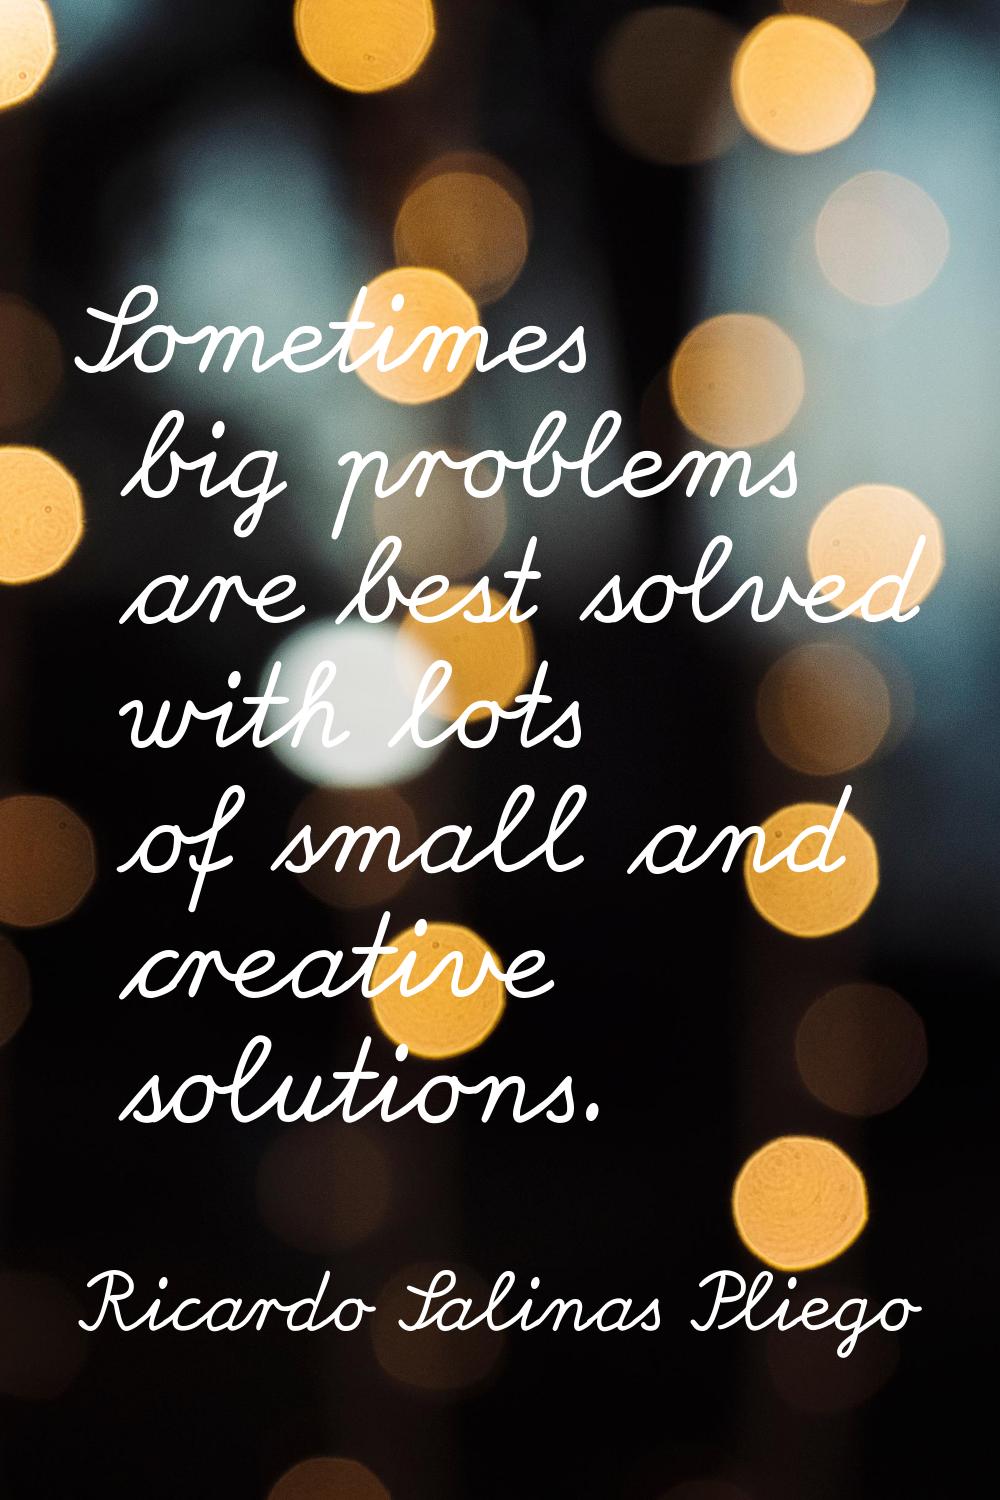 Sometimes big problems are best solved with lots of small and creative solutions.